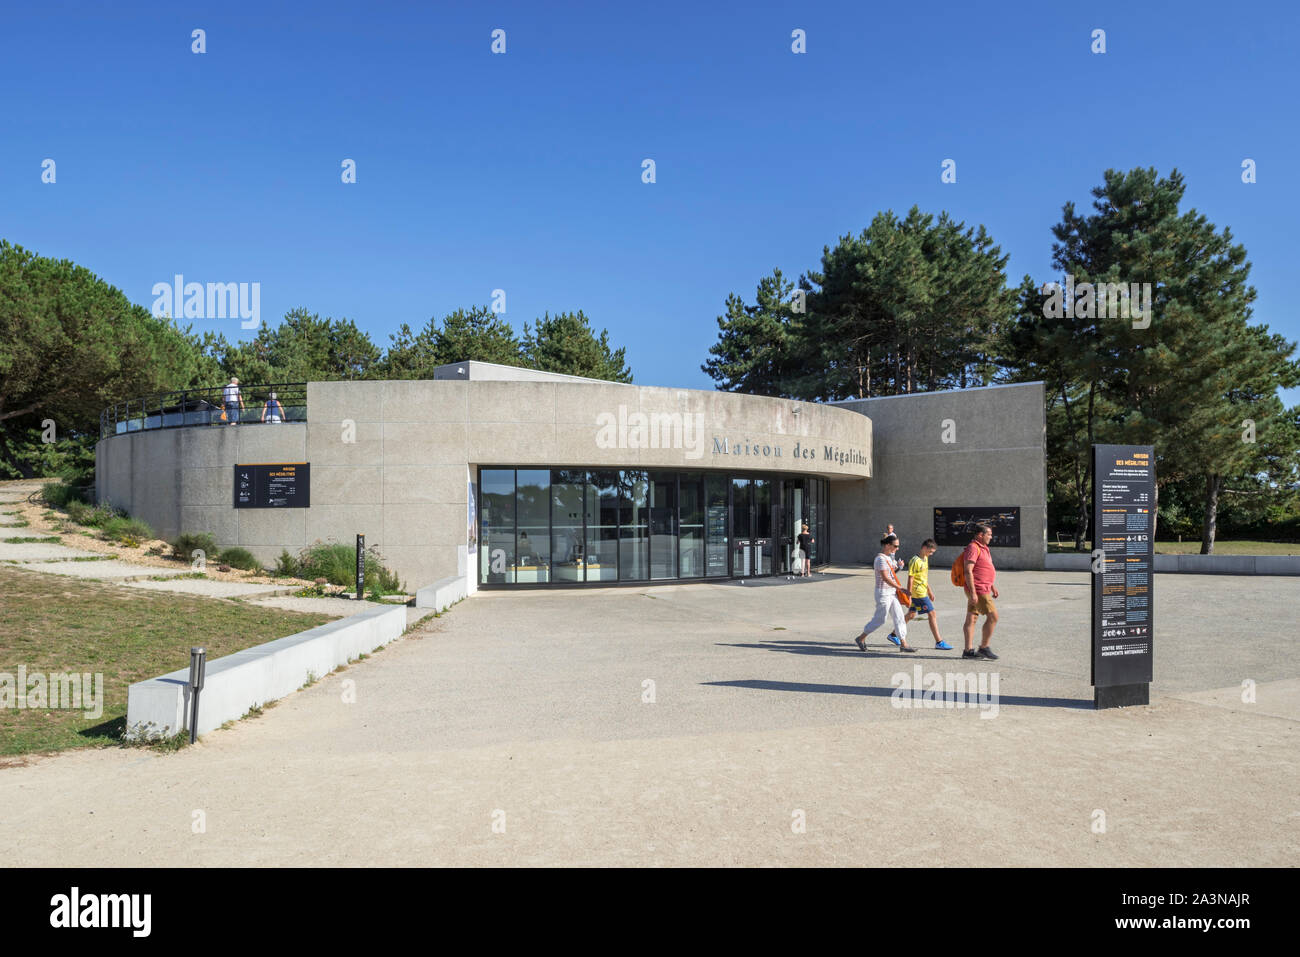 Maison des mégalithes, visitors center about the Carnac alignments, megalithic site in Morbihan, Quiberon, Brittany, France Stock Photo